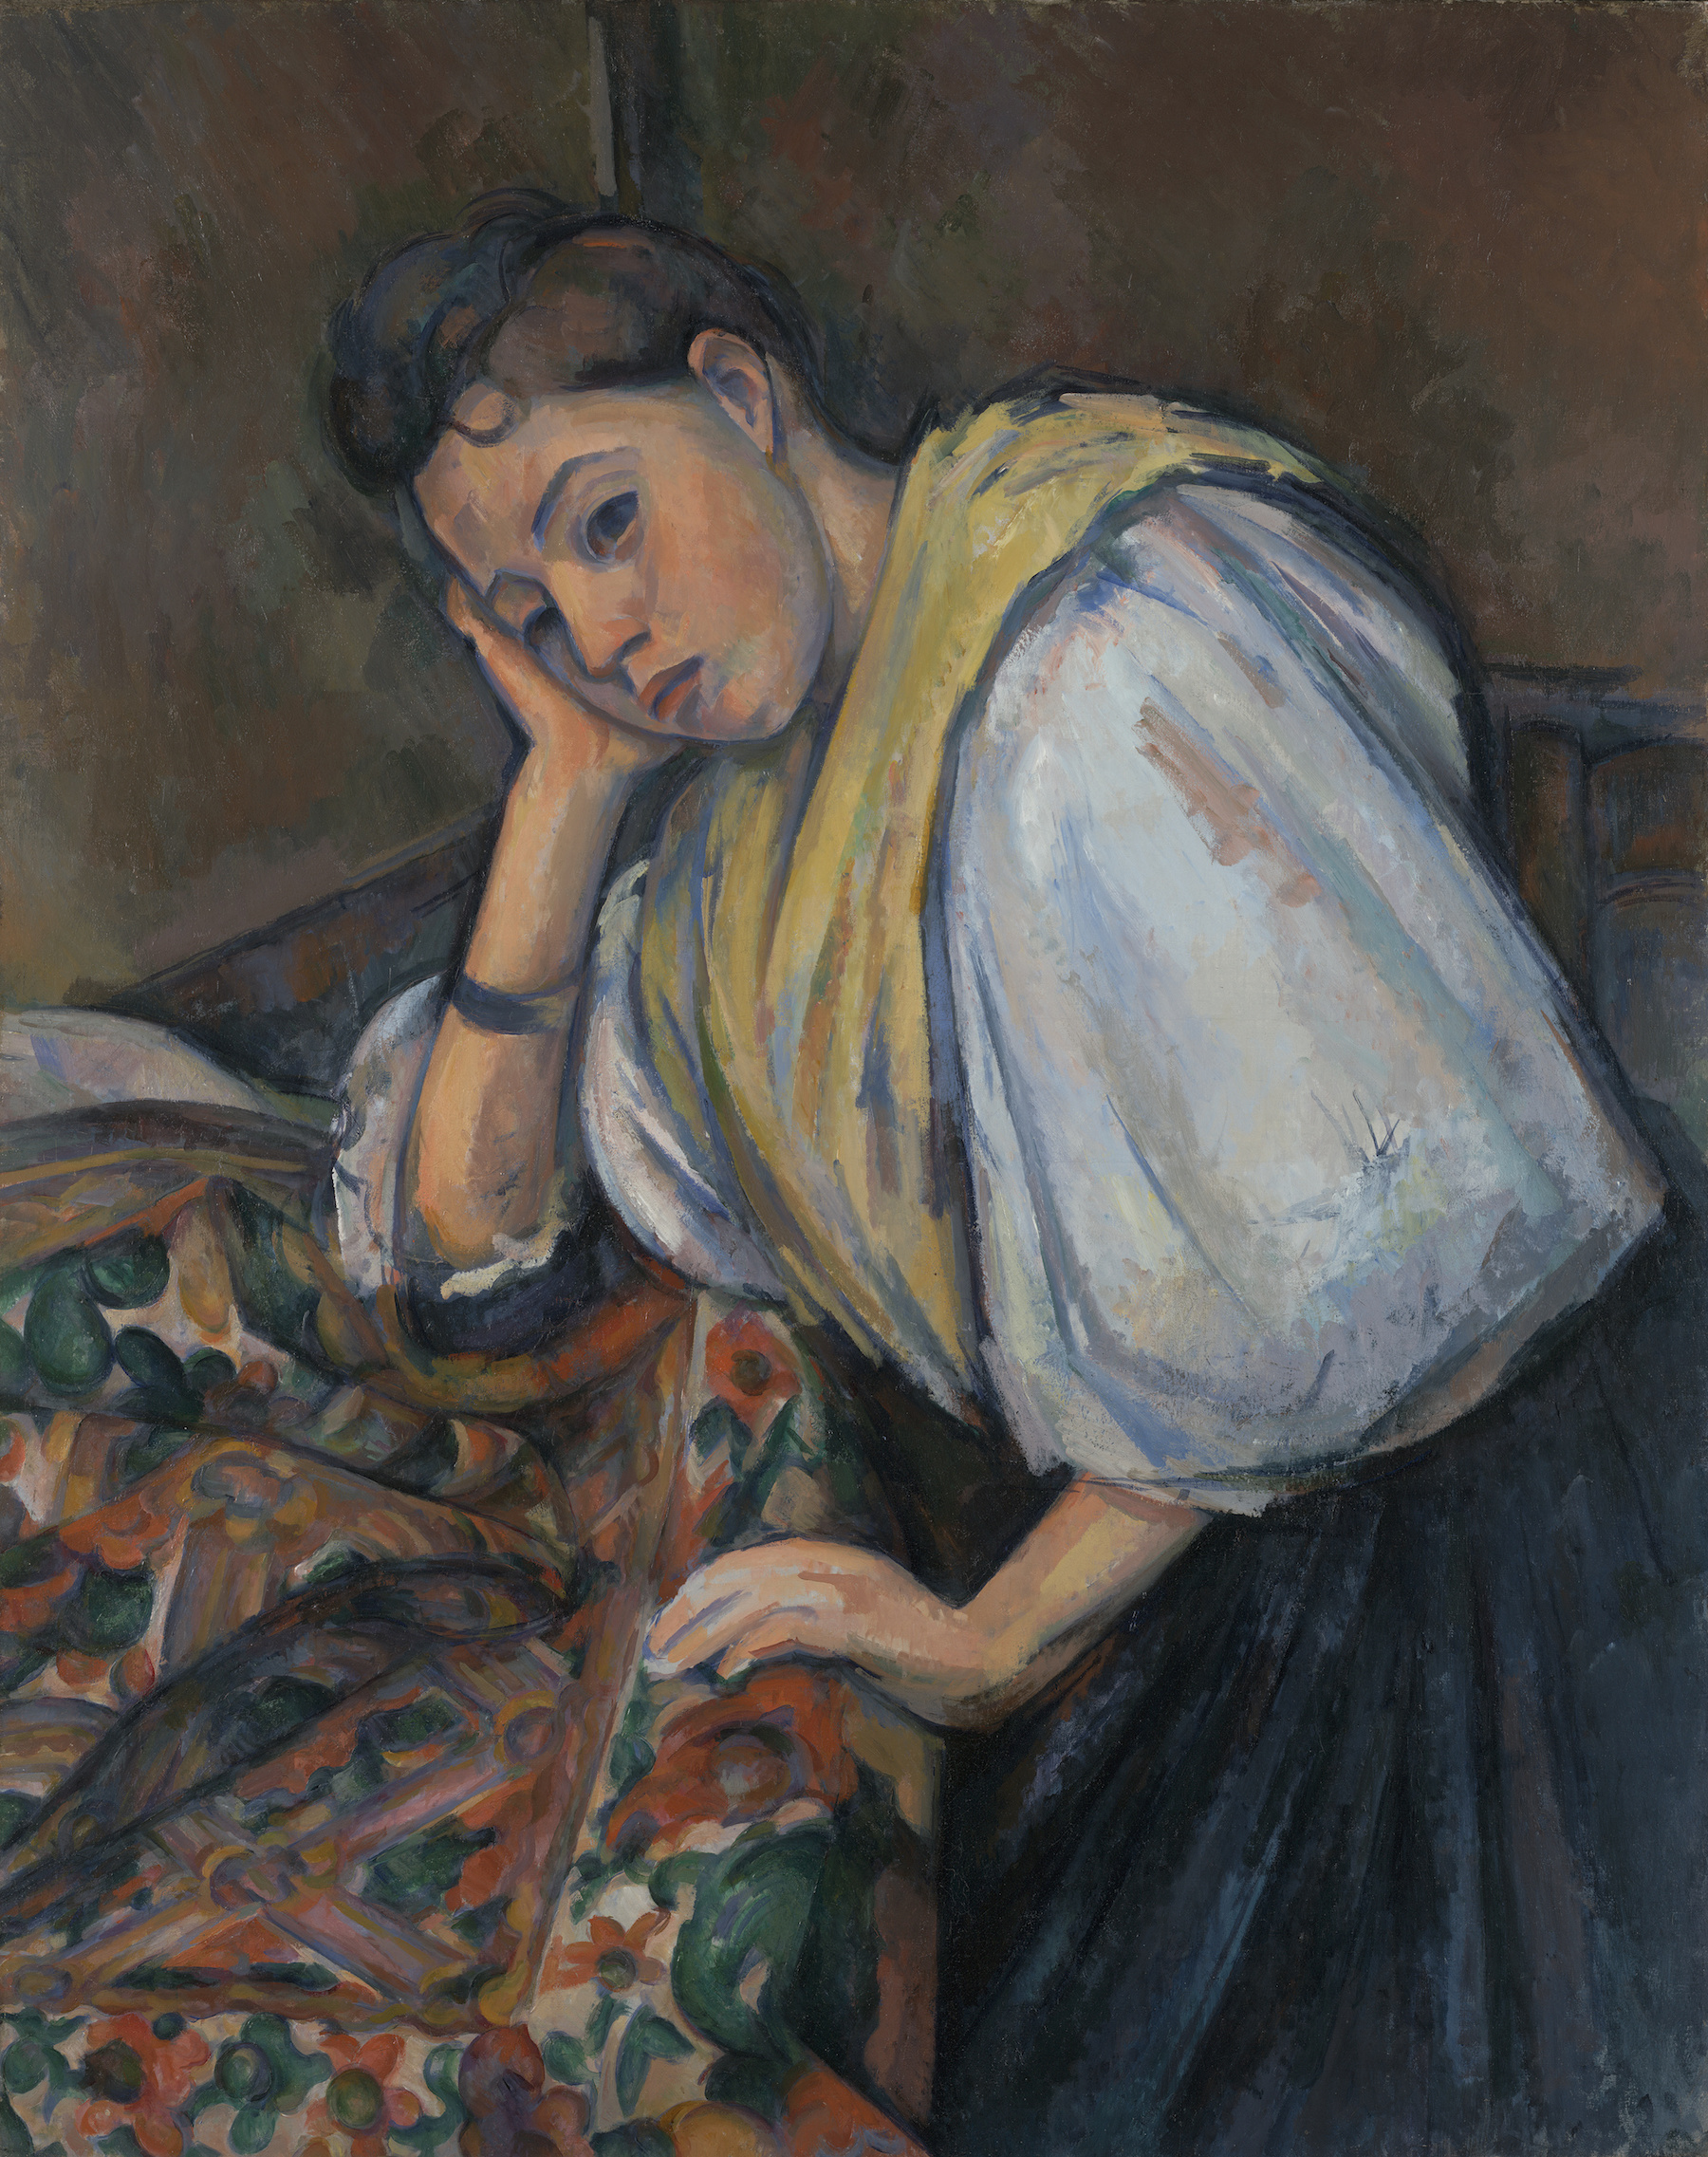 Young Italian Woman at a Table by Paul Cézanne - 1895 - 1900 - 92.1 x 73.5 cm J. Paul Getty Museum